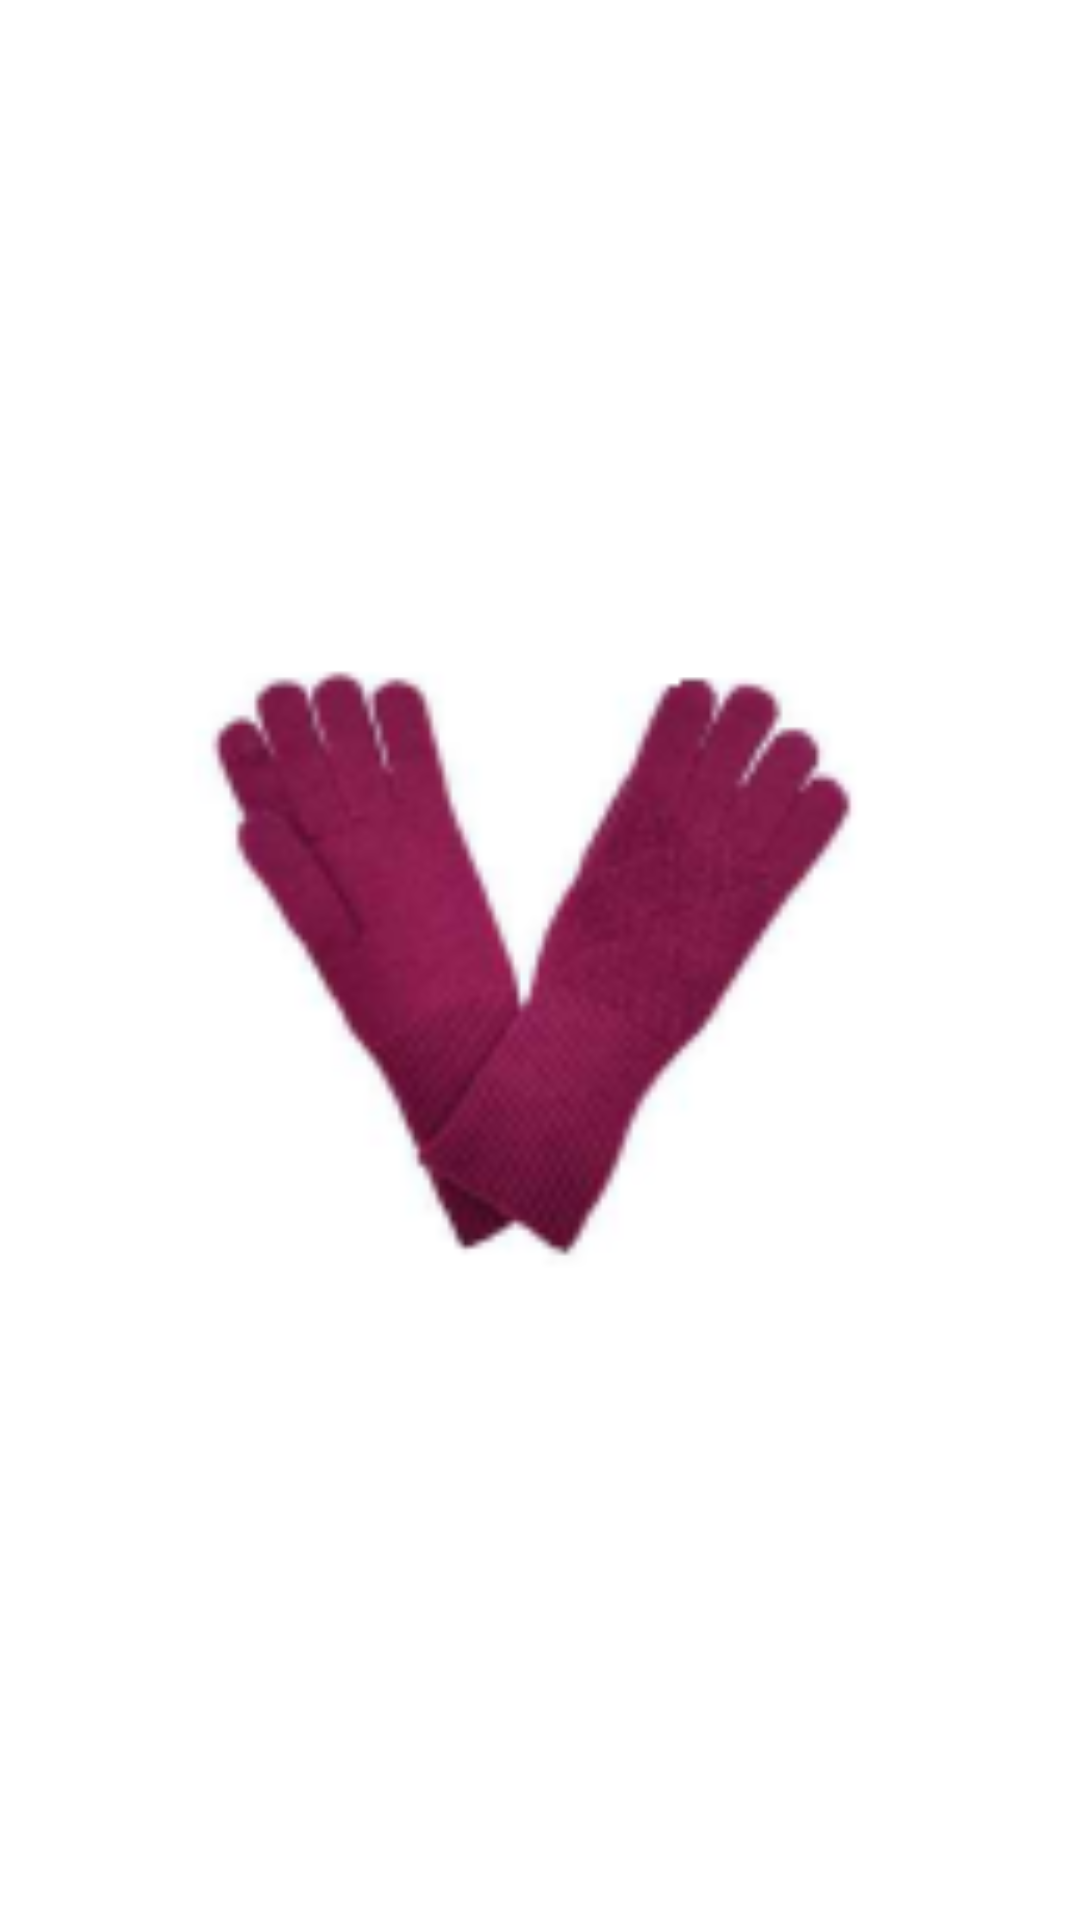 Solid Criss Cross Knit Gloves